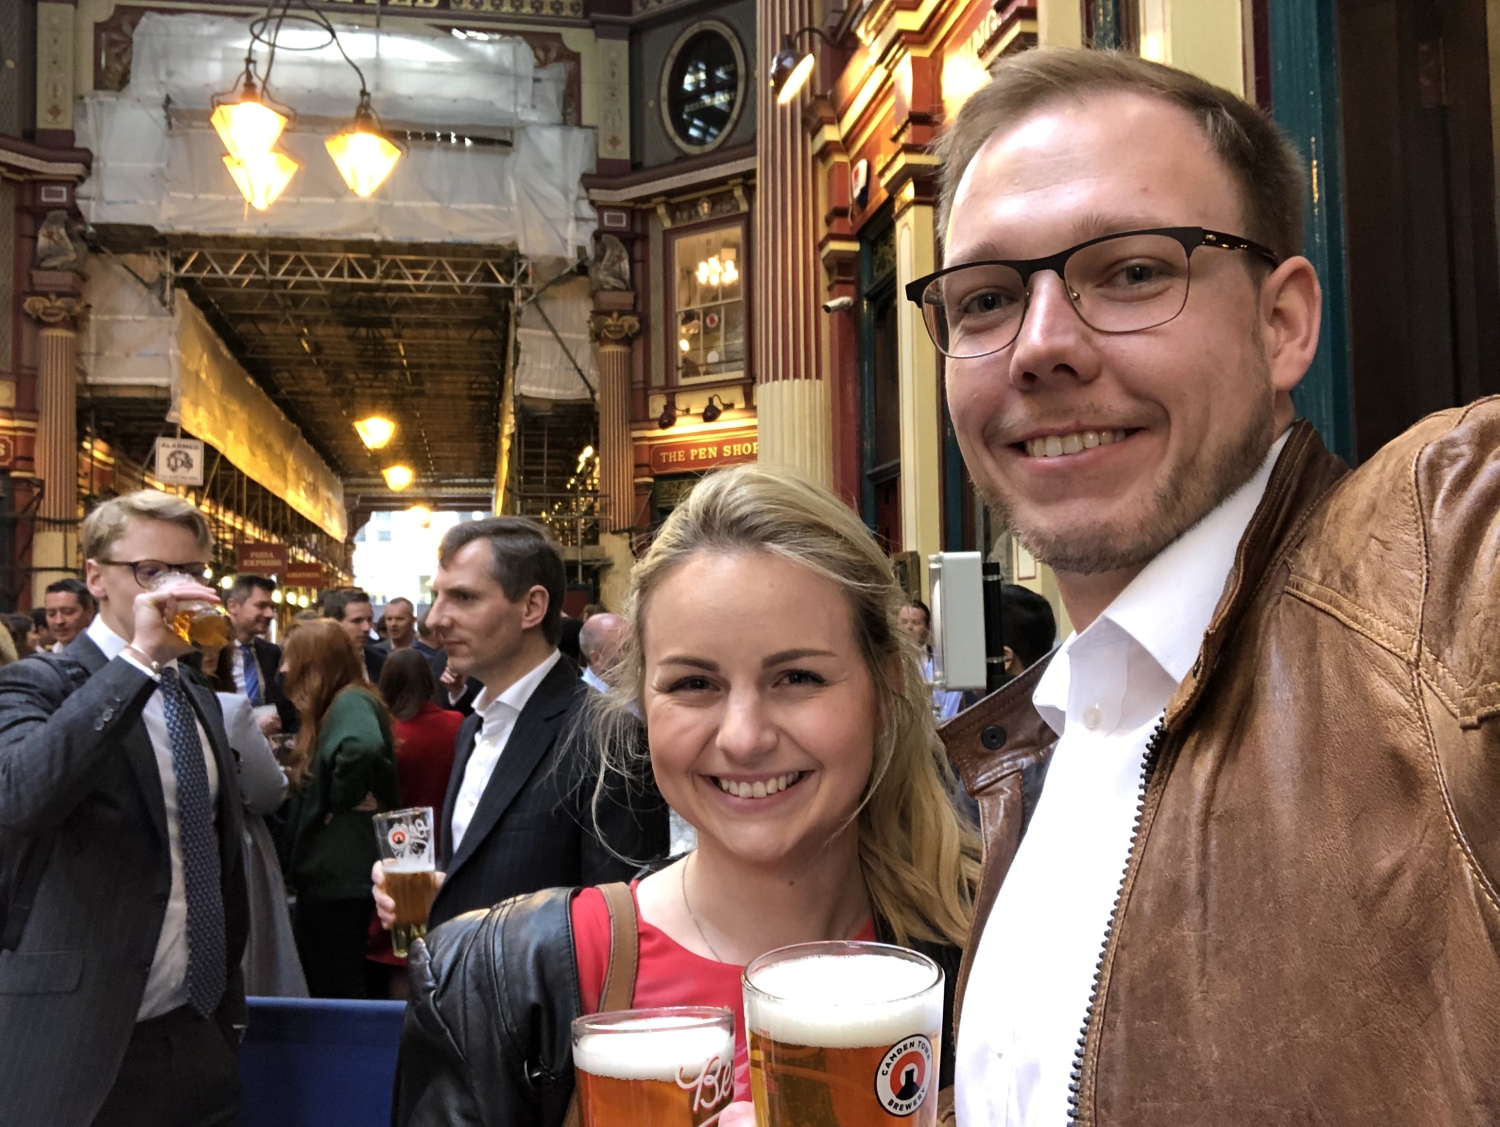 Beer and cider in the pub "The Lamb Tavern" in the Leadenhall Market 